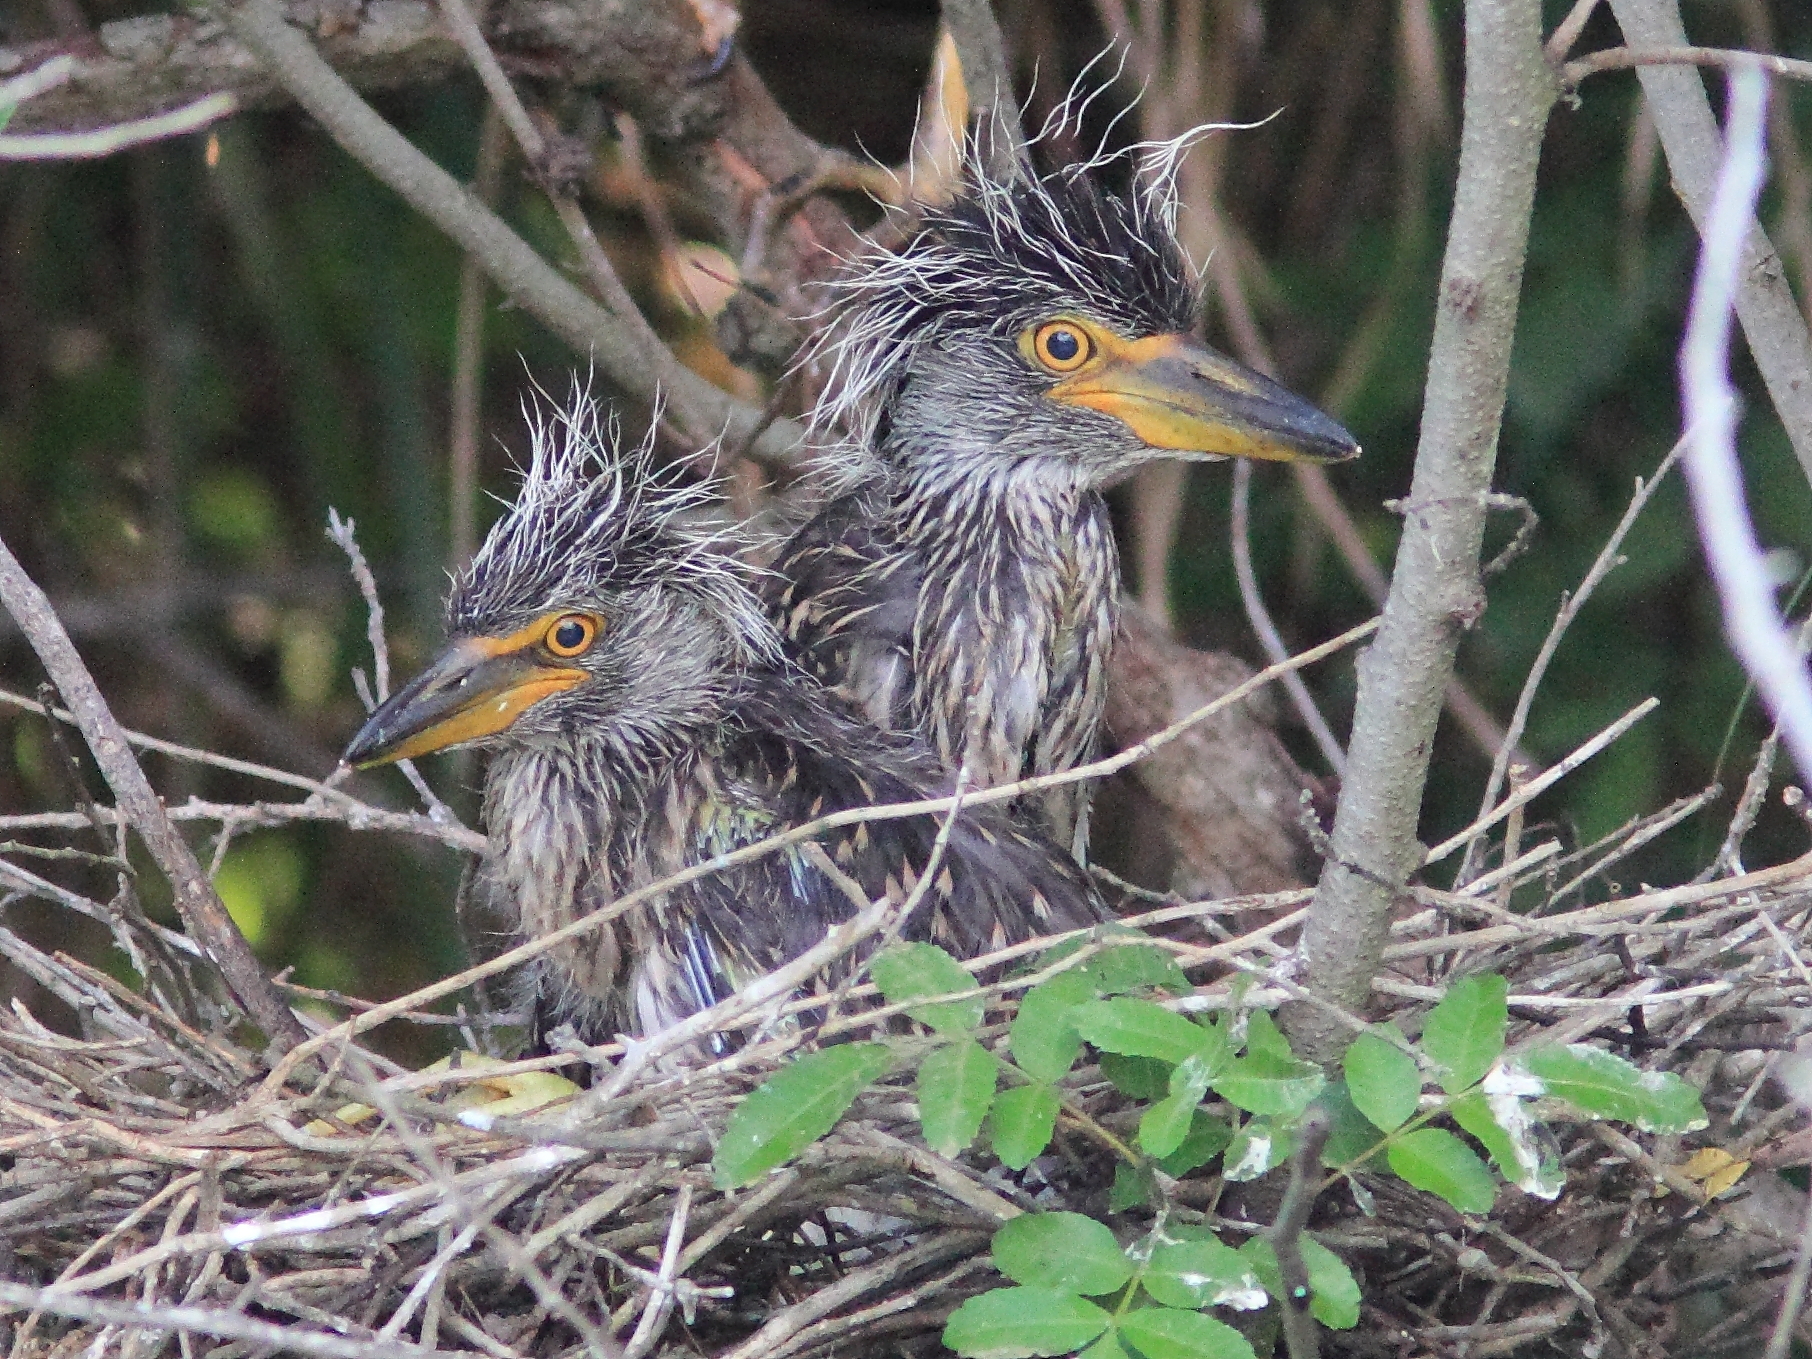 Yellow-crowned Night-Heron Nestlings. <a href="https://www.flickr.com/photos/rosyfinch/8904864307/" target="_blank" >Photo</a>: Kenneth Cole Schneider/<a href="https://creativecommons.org/licenses/by-nc-nd/2.0/" target="_blank" >CC BY-NC-ND 2.0</a>